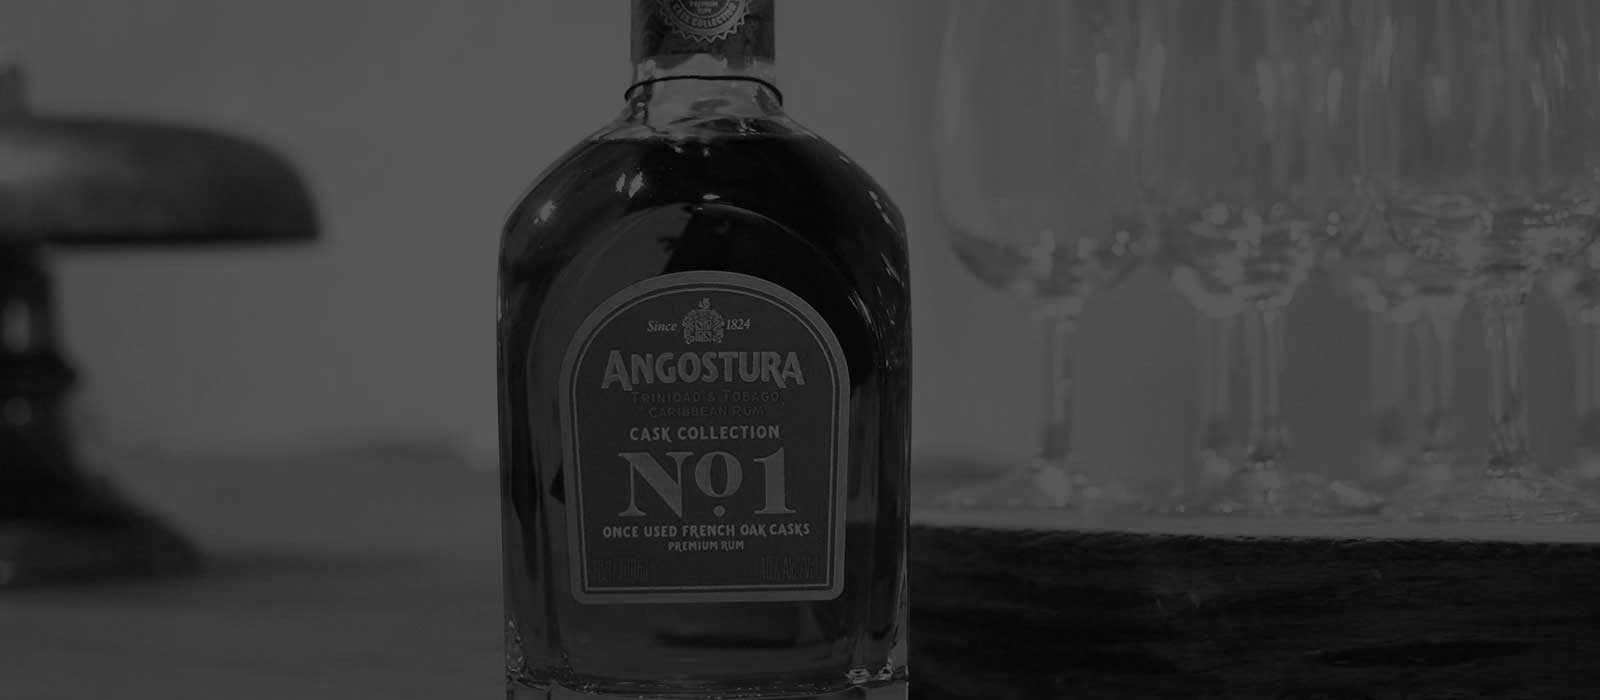 Silver 2015: Angostura No.1 Cask Collection Once Used French Oak